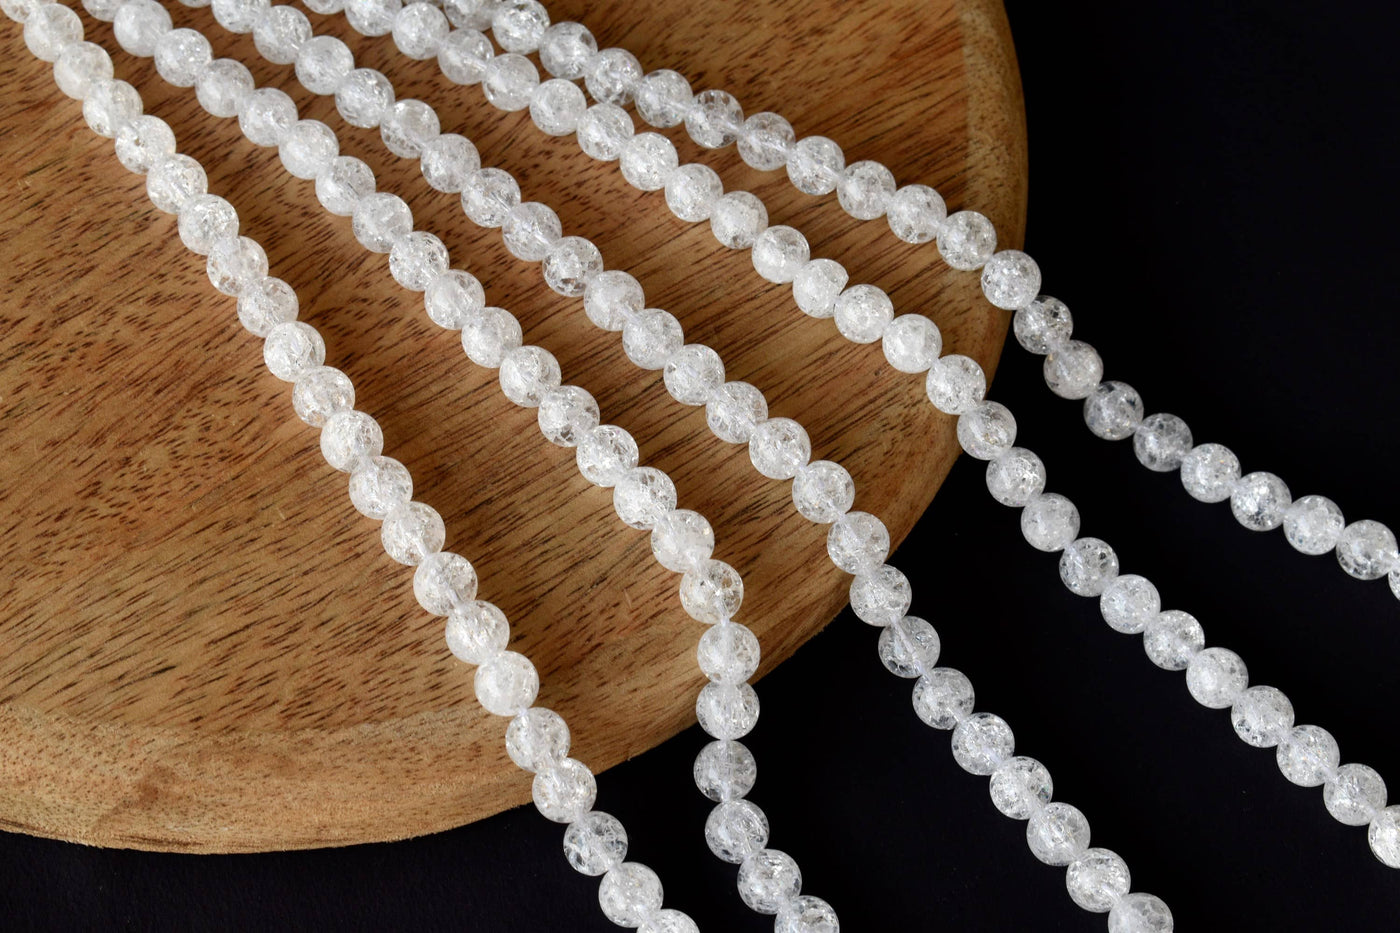 Crack Crystal Beads, Natural Round Crystal Beads 8mm, 10mm